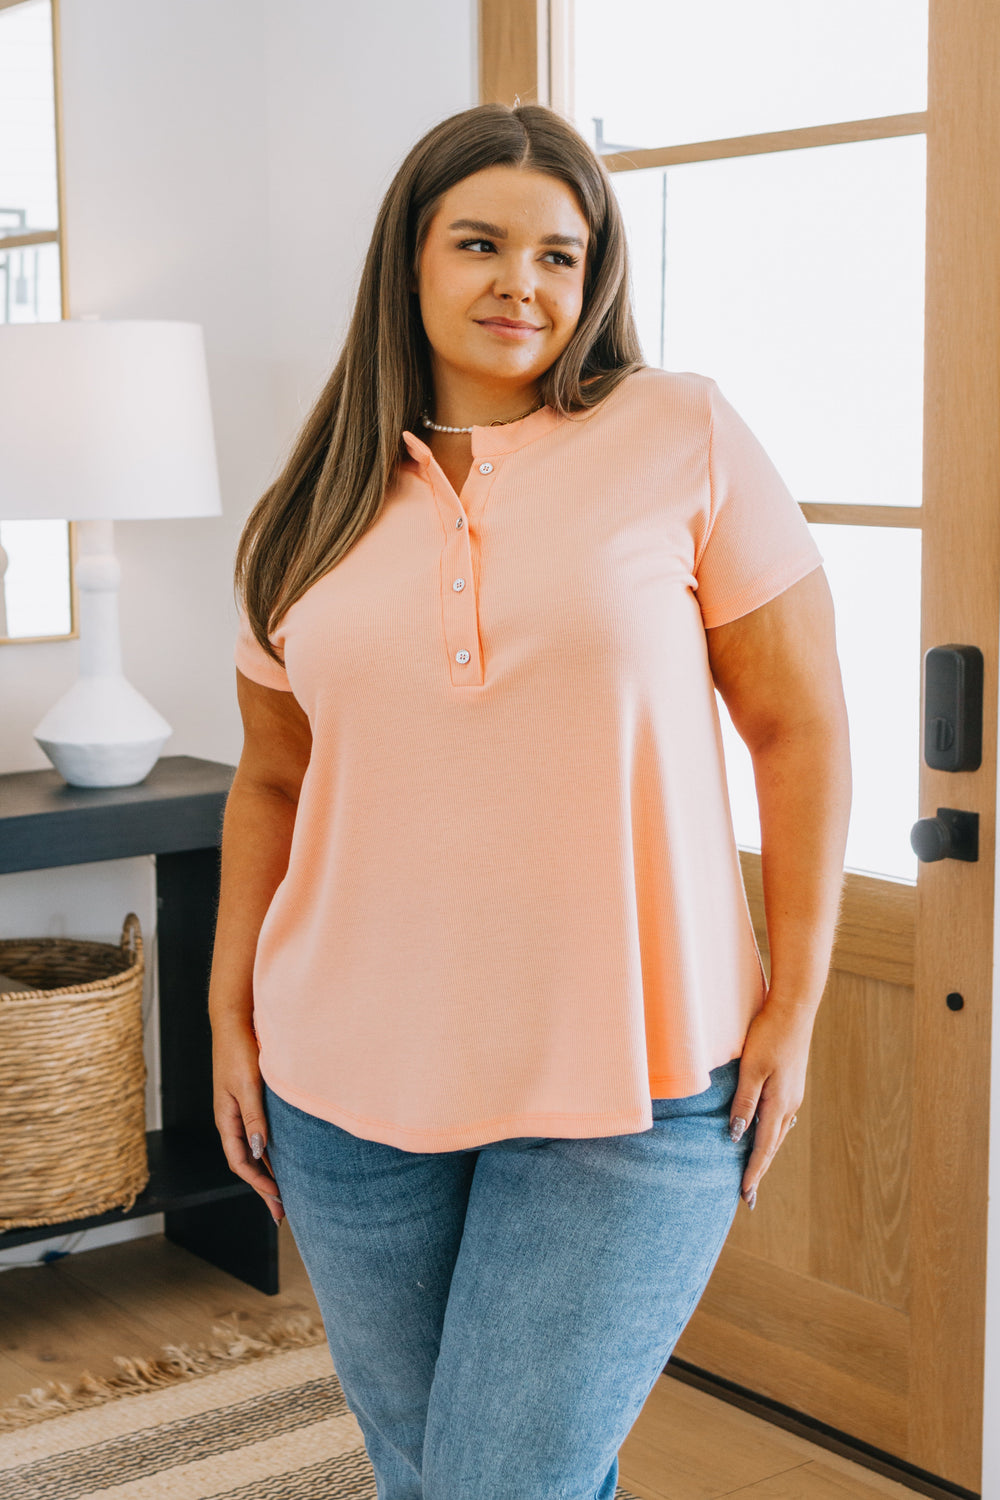 Tippy Top Ribbed Knit Henley-Short Sleeve Tops-Inspired by Justeen-Women's Clothing Boutique in Chicago, Illinois